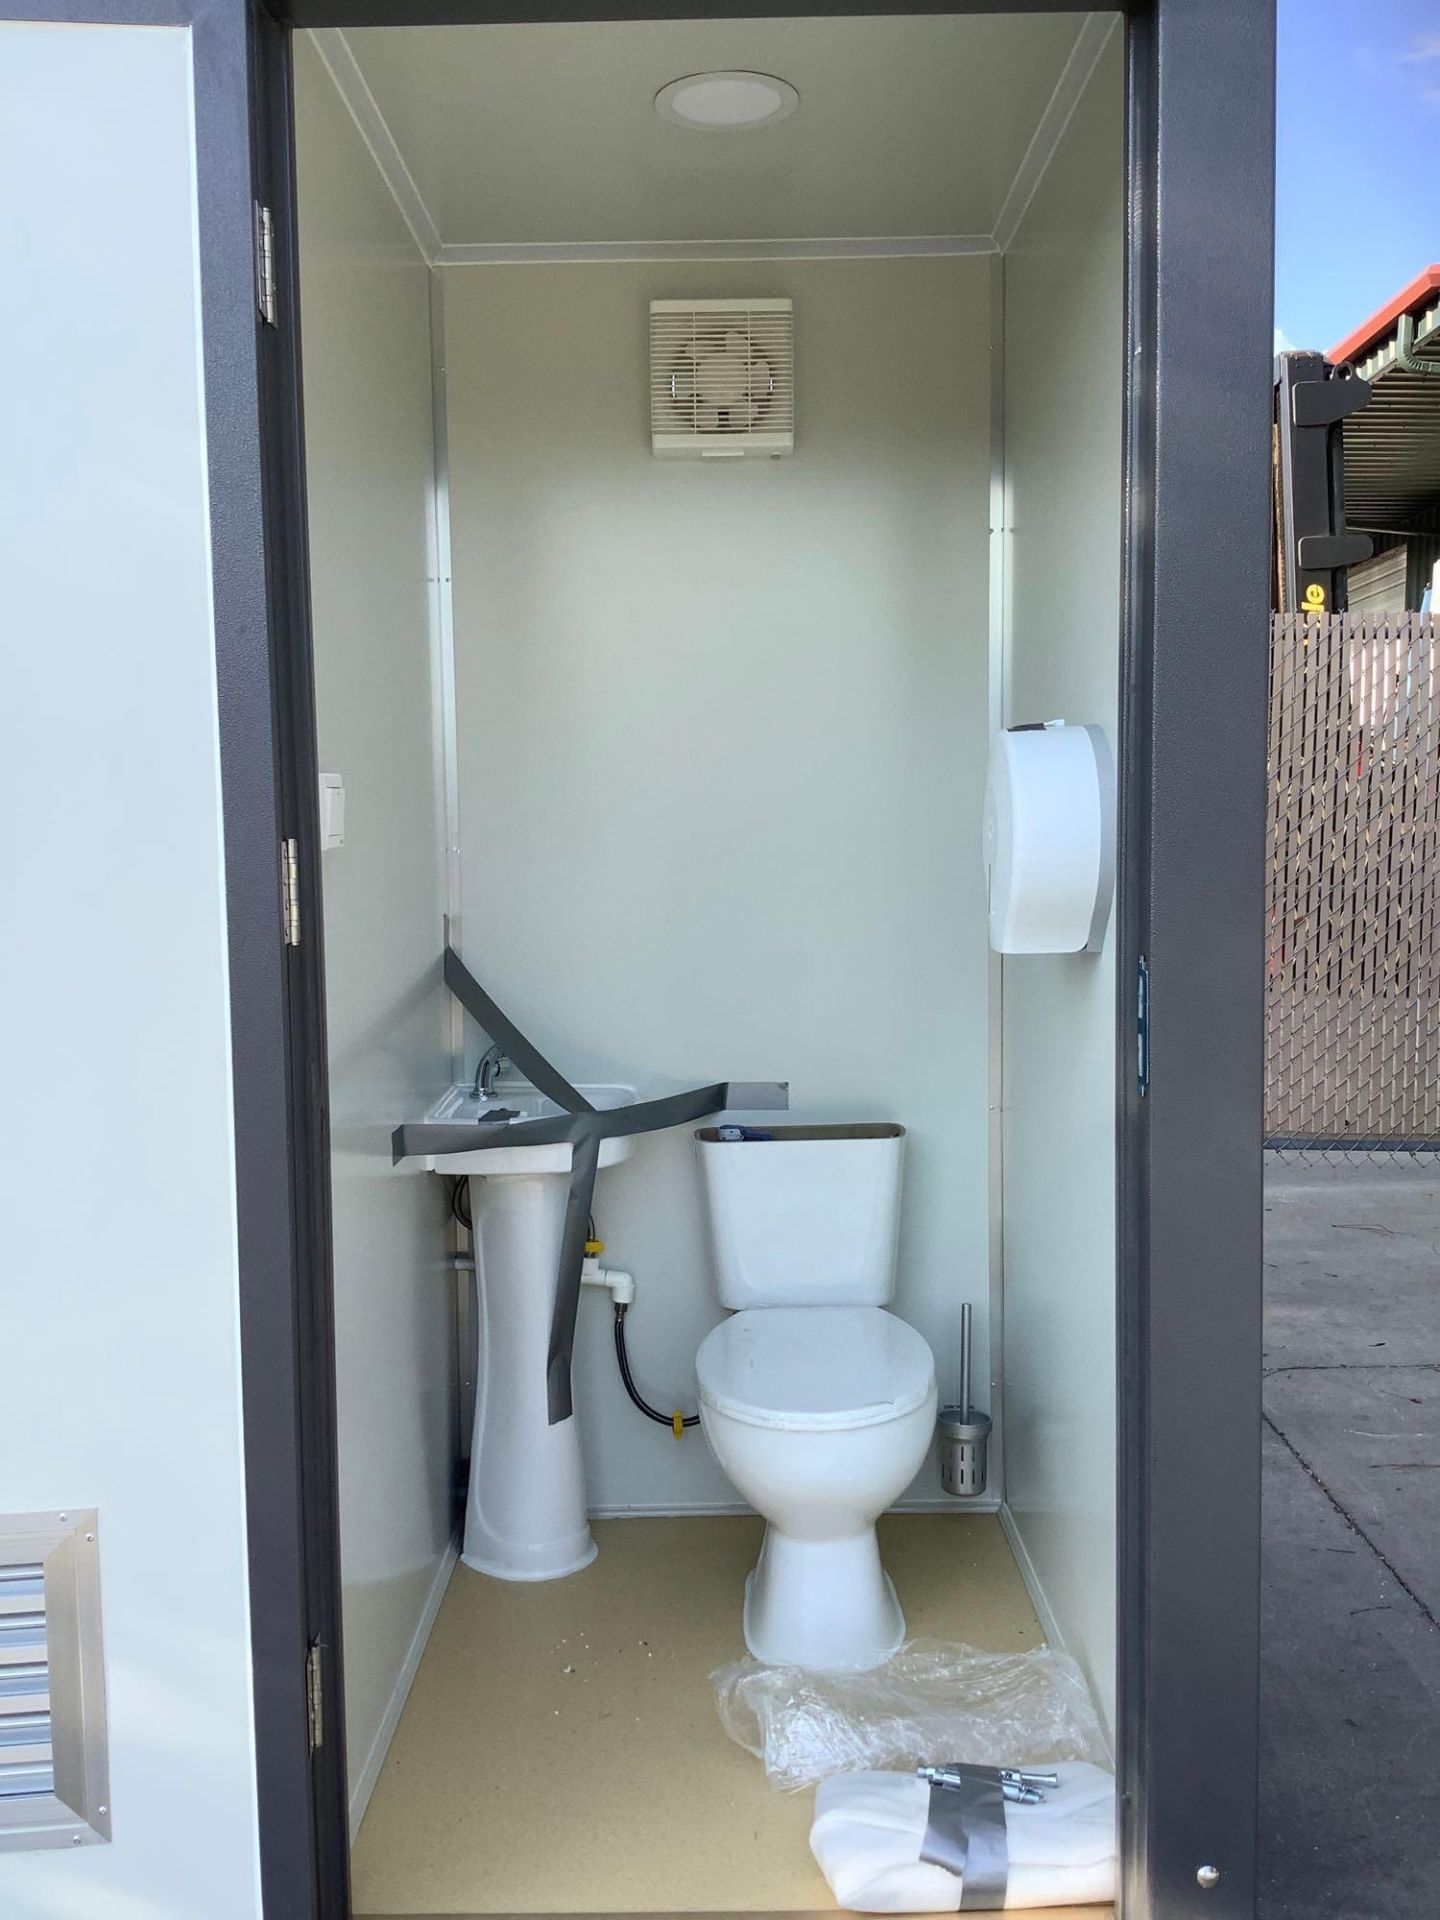 UNUSED PORTABLE DOUBLE BATHROOM UNIT, 2 STALLS, ELECTRIC & PLUMBING HOOK UP WITH EXTERIOR PLUMBING C - Image 11 of 13